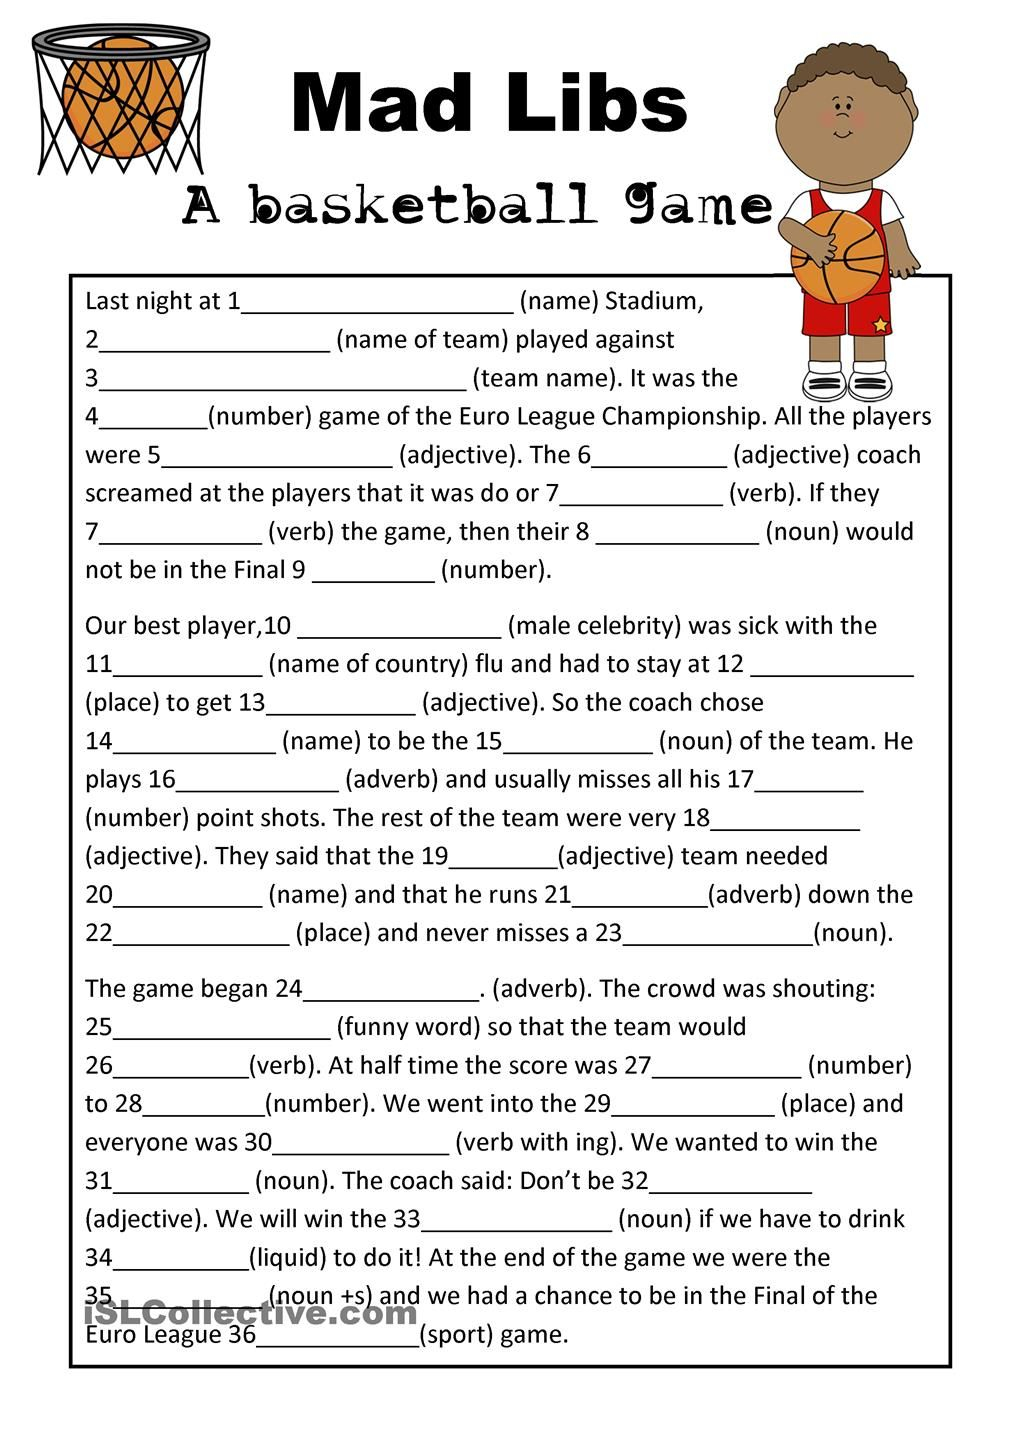 Mad Libs Basketball Game Parts Of Speech Worksheets Mad Libs Parts 